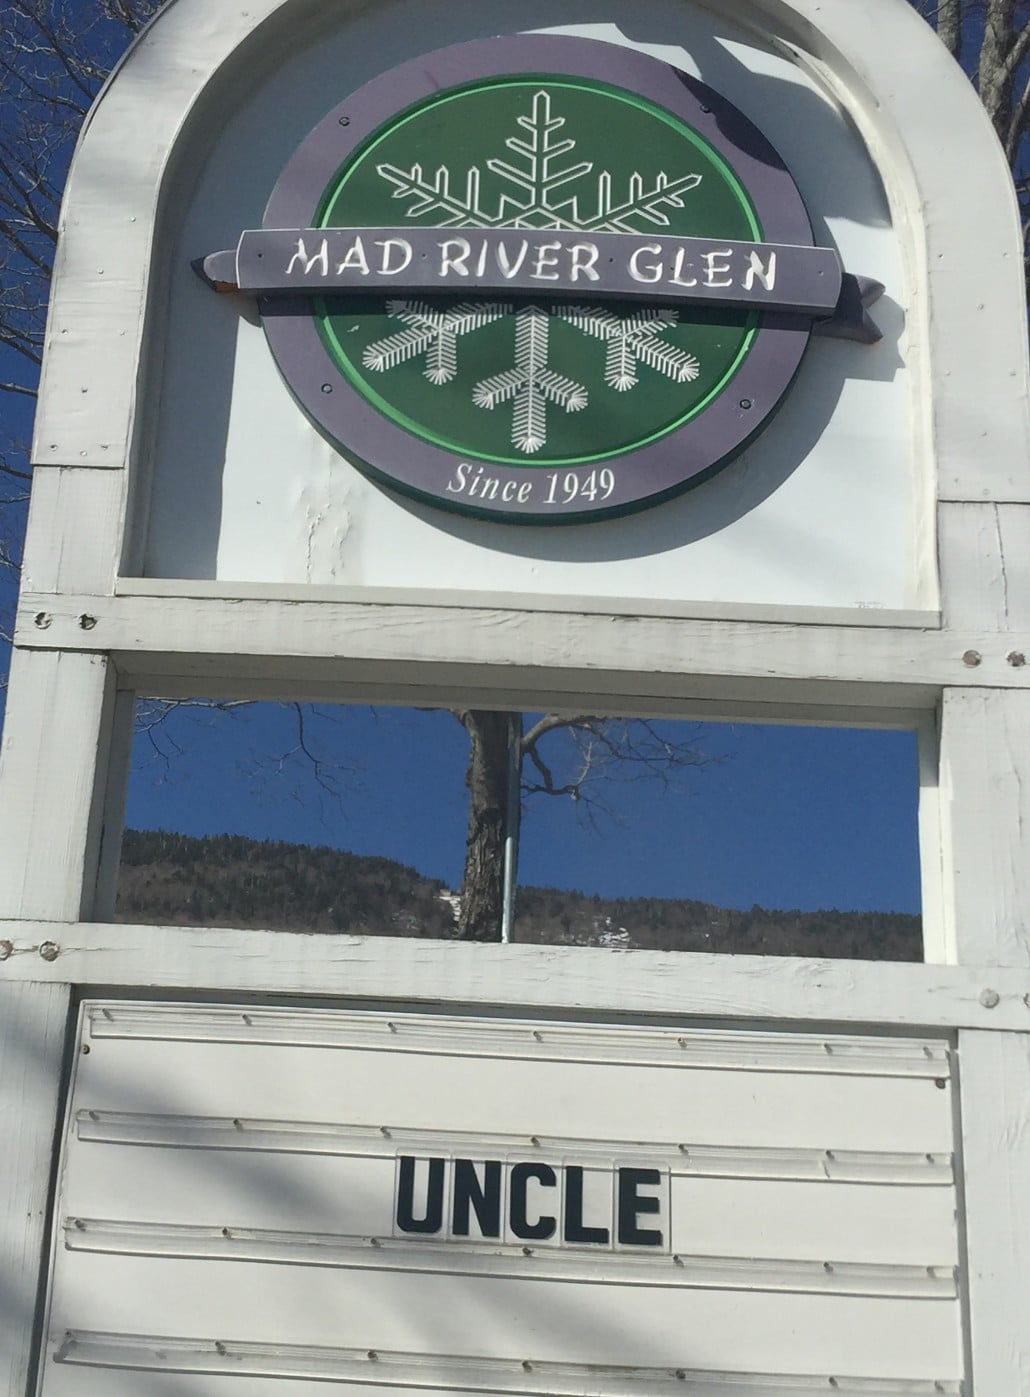 Challenging 2016 season for Mad River Glen